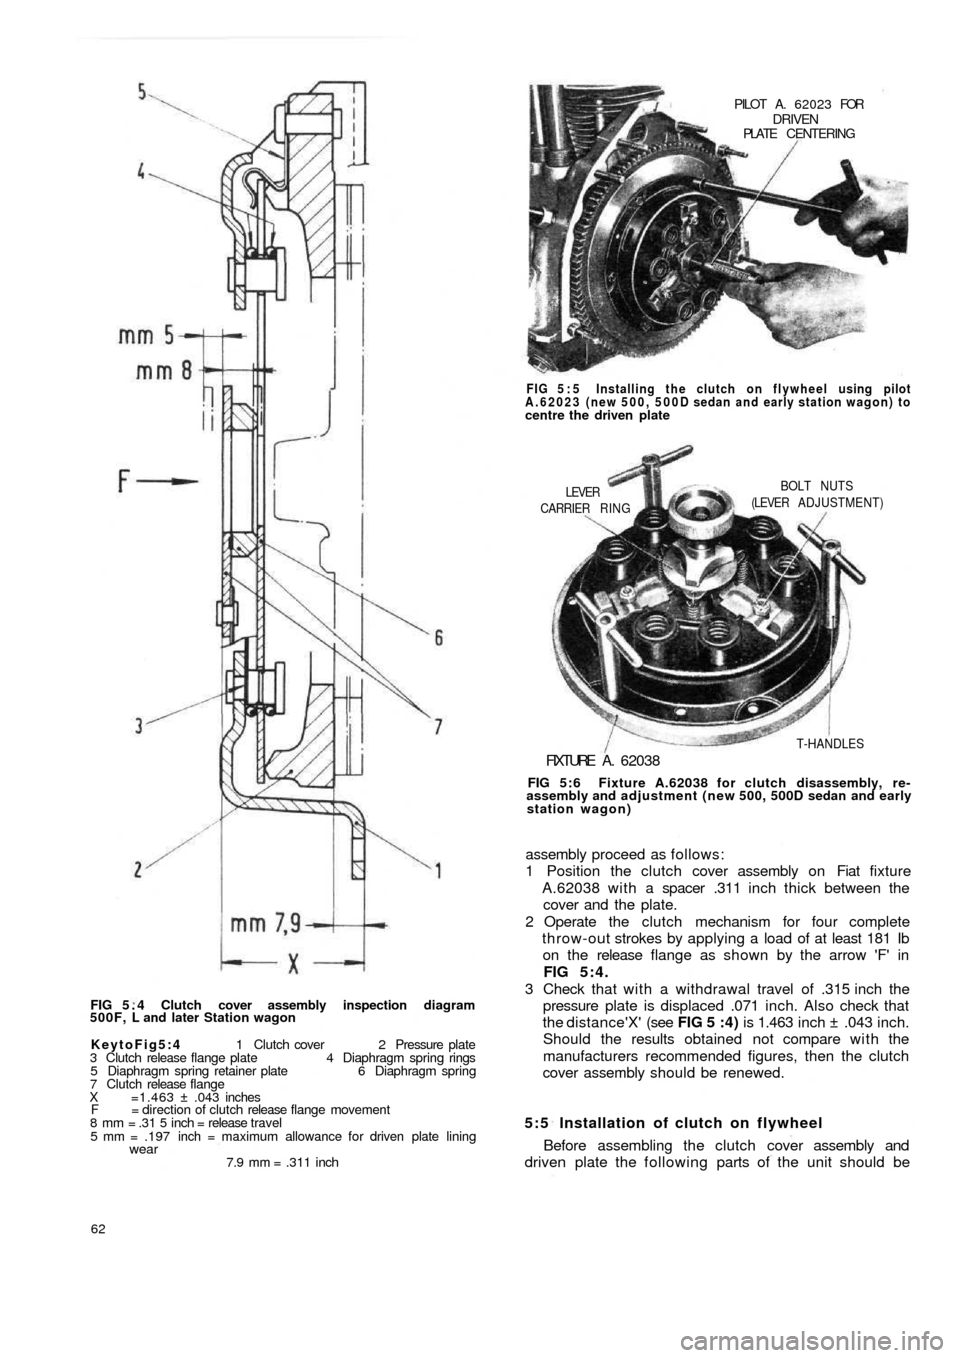 FIAT 500 1970 1.G Repair Manual FIG 5 . 4  Clutch cover assembly inspection diagram
500F, L and later Station wagon
KeytoFig5:4 1 Clutch cover 2 Pressure plate
3 Clutch release flange plate 4 Diaphragm spring rings
5 Diaphragm sprin